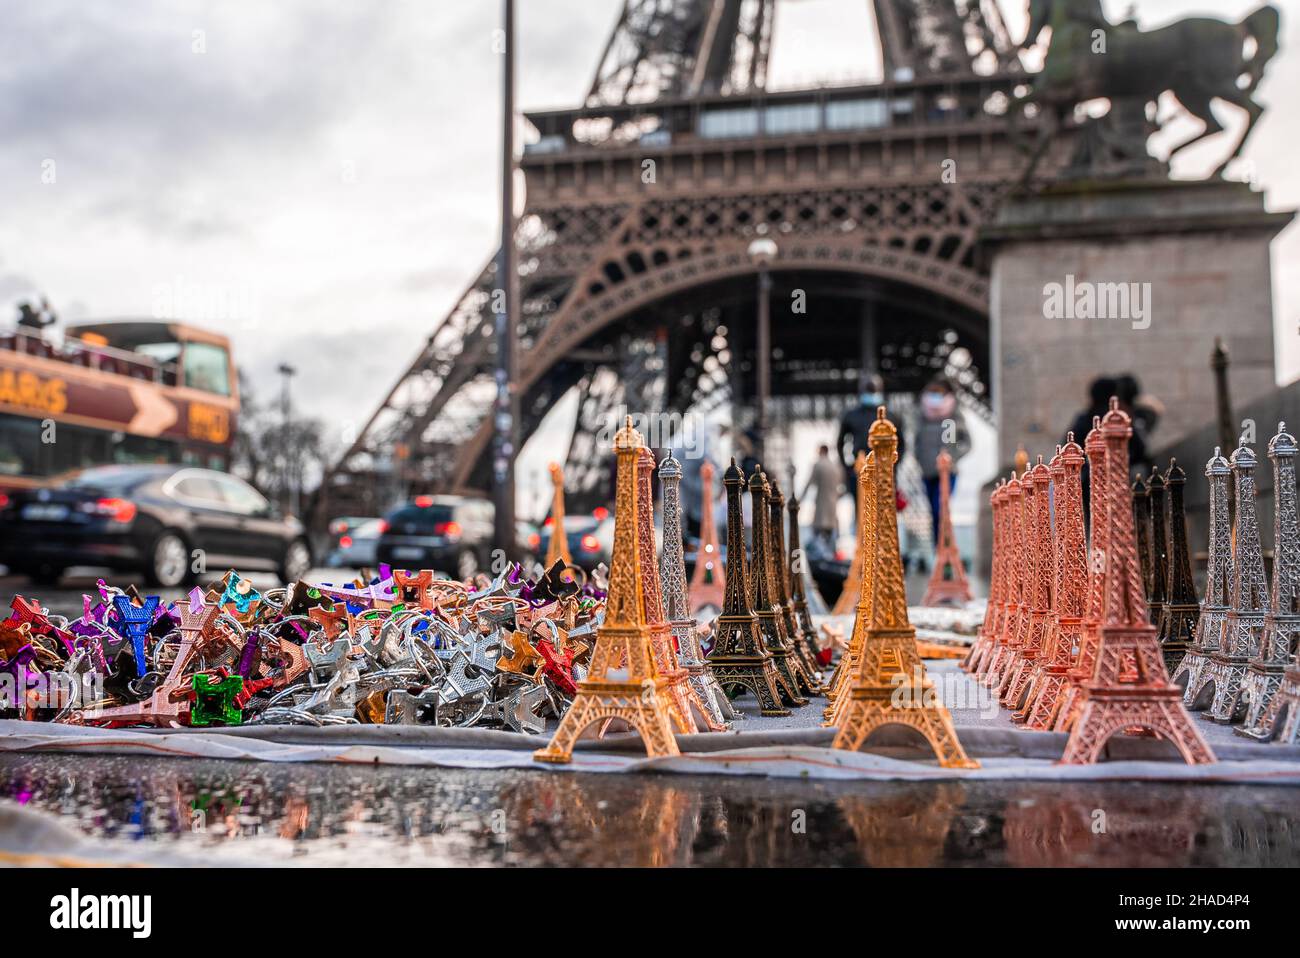 Eiffel tower souvenirs with a real Eiffel tower in the background. Stock Photo